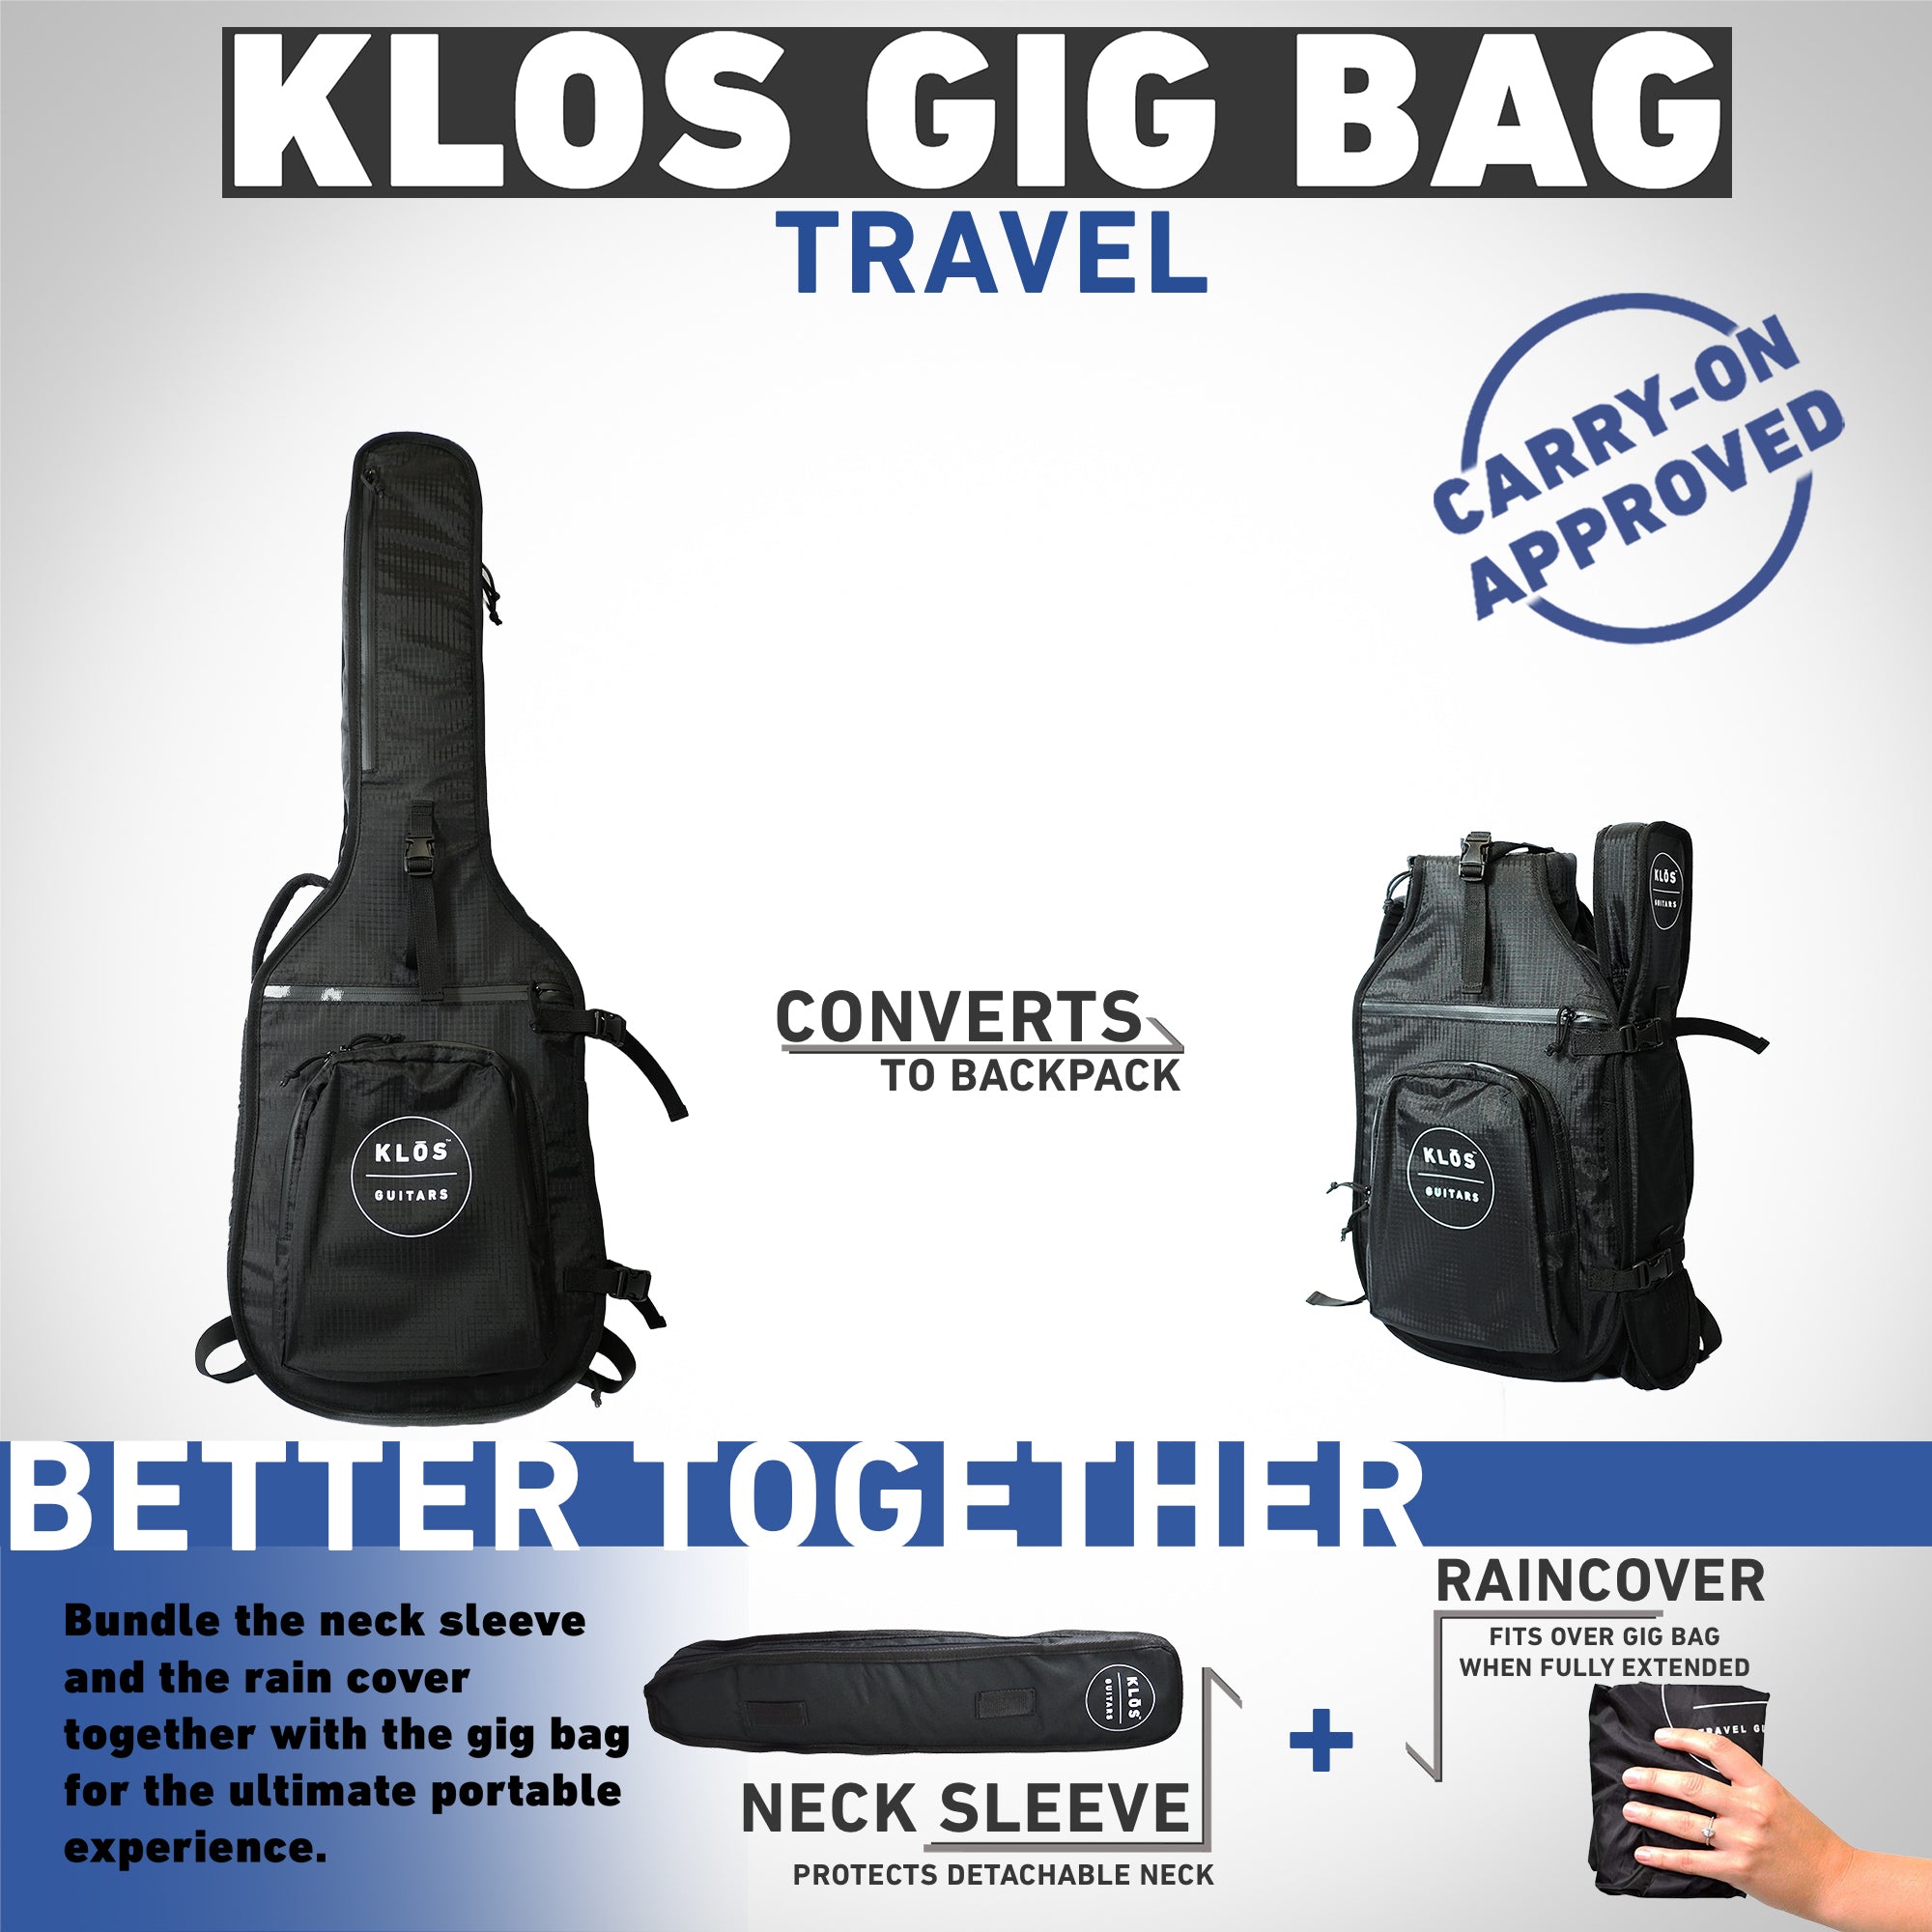 KLŌS Travel gig bag converts into a back pack. Carry on approved. Bundle with a neck sleeve and rain cover